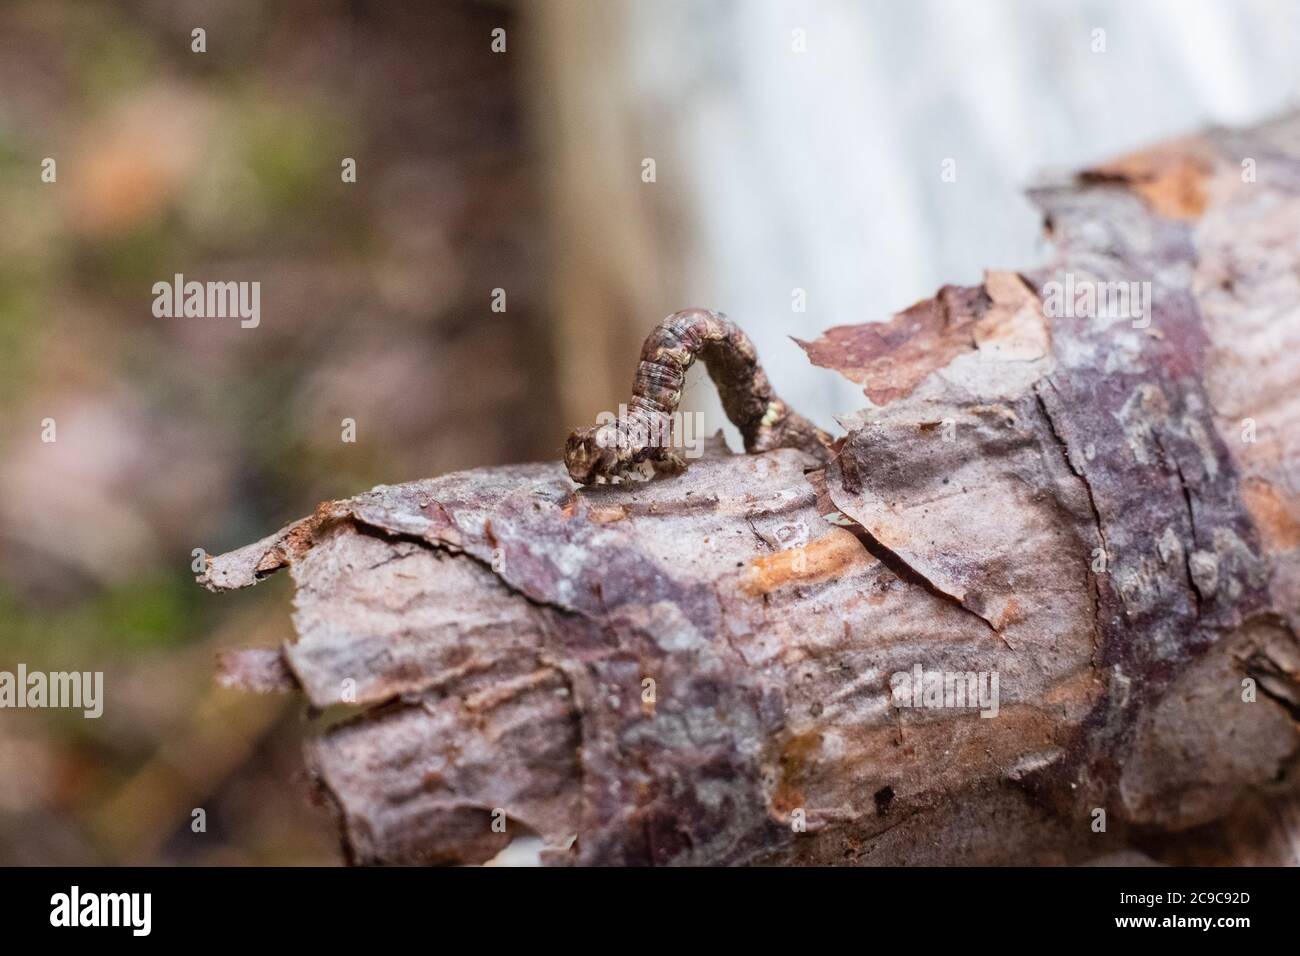 Geometer moth caterpillar on small branch. Mimicry of insects. Stock Photo